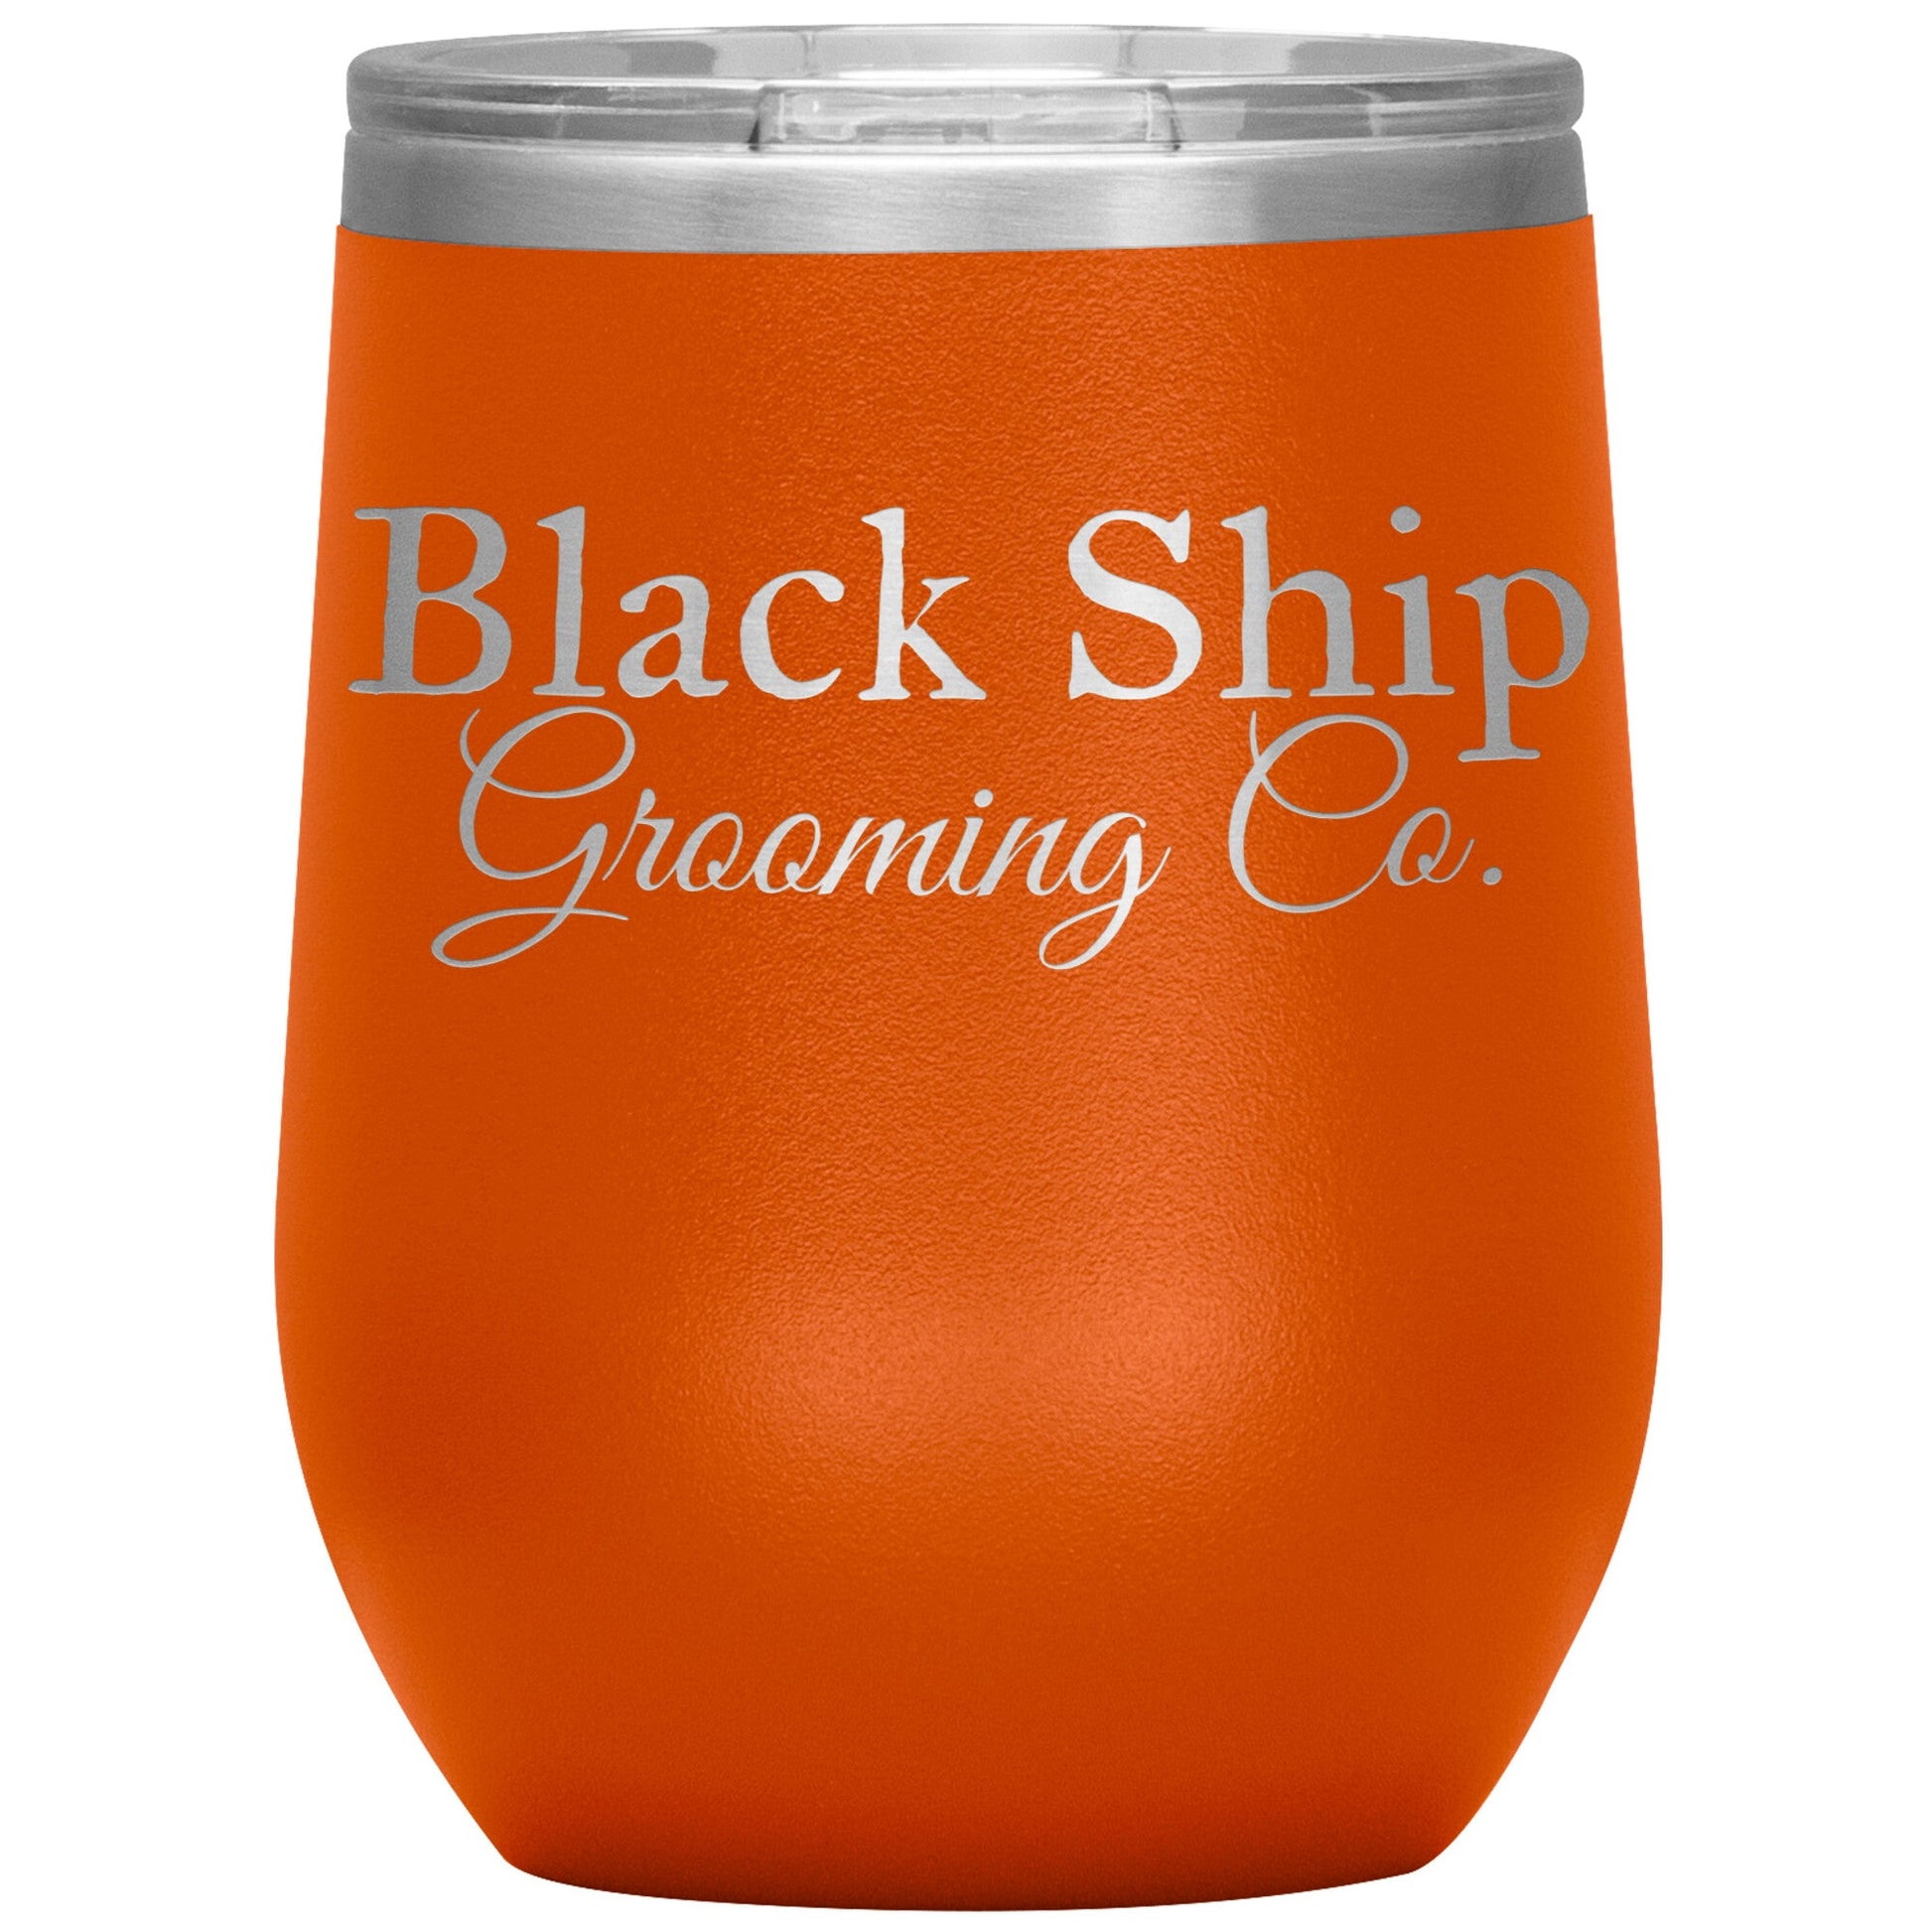 Black Ship Grooming Co. 12oz Insulated Wine Tumbler - Black Ship Grooming Co.